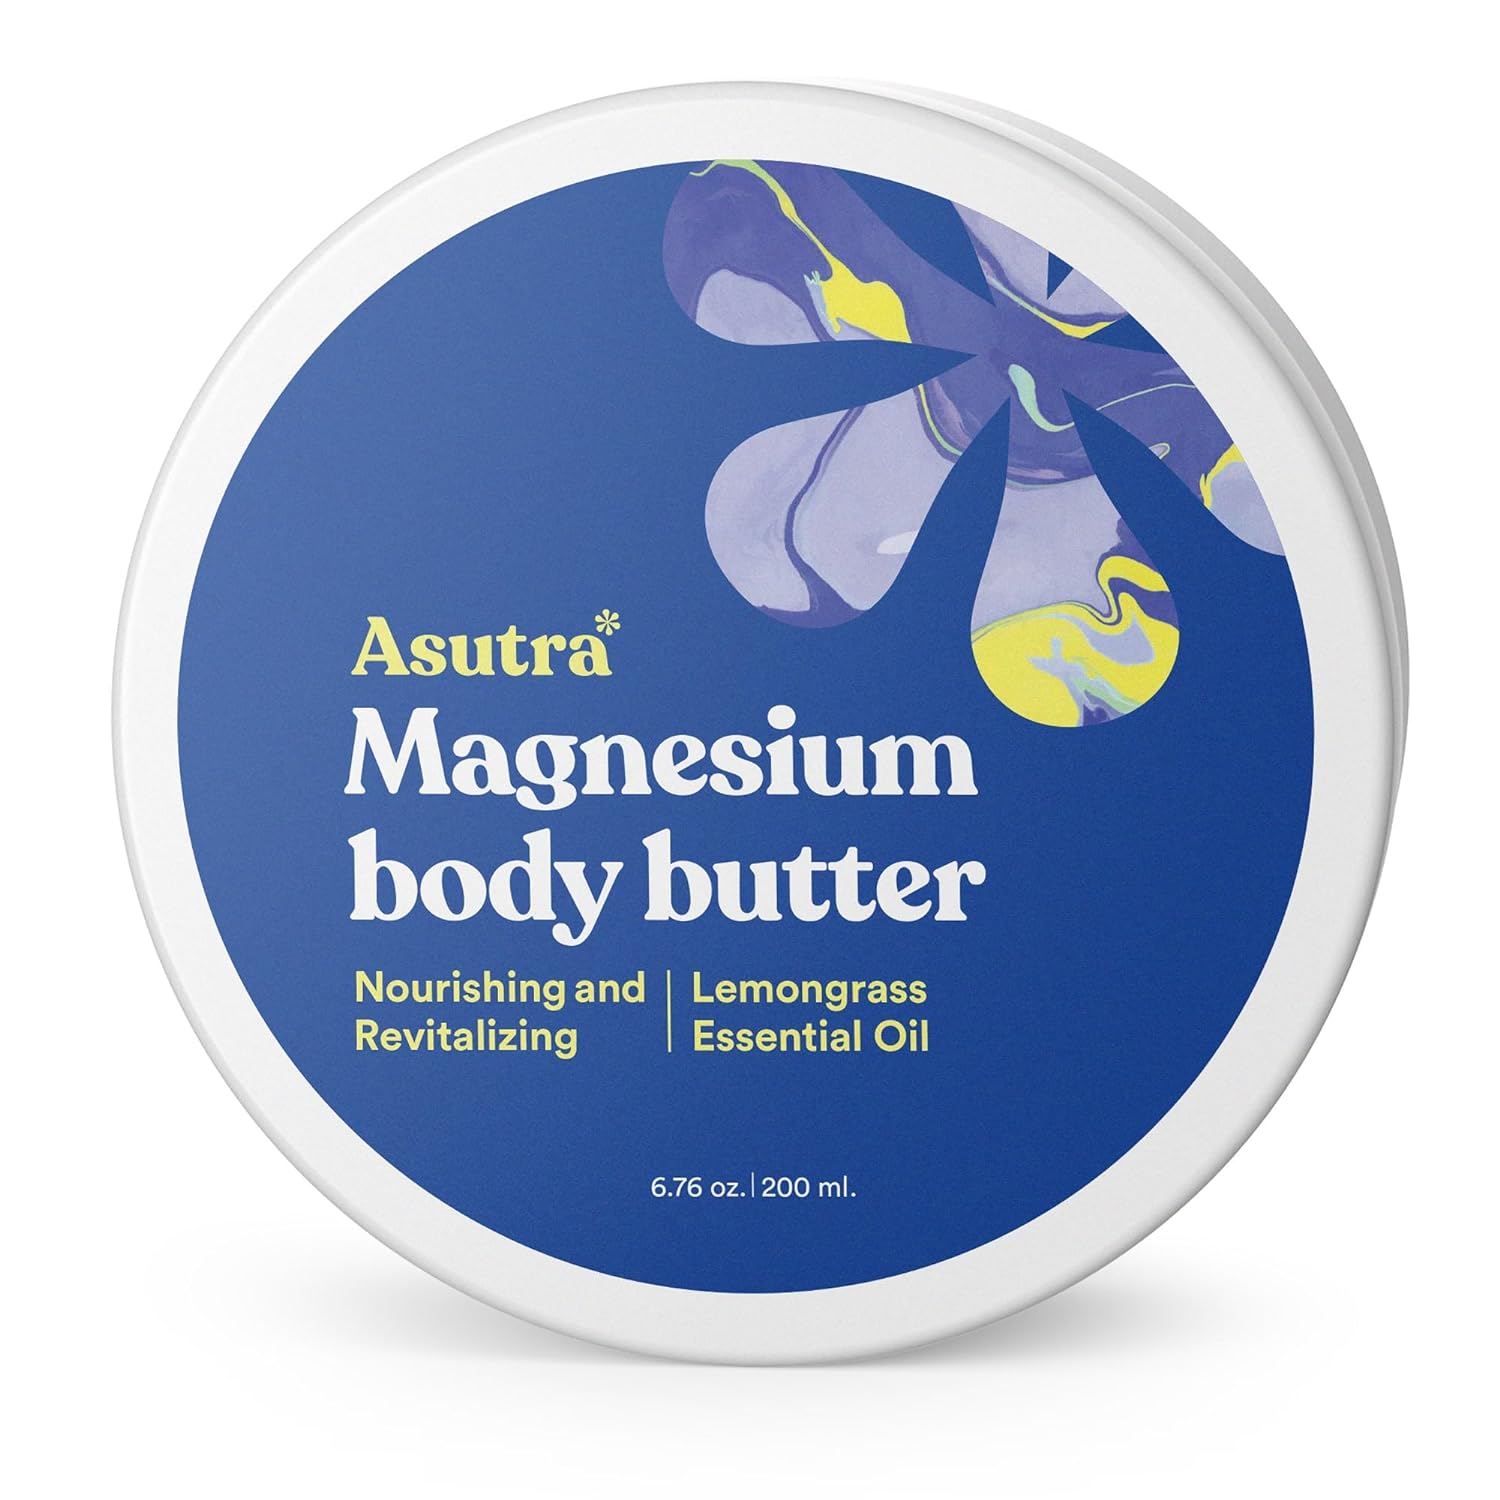 ASUTRA Magnesium Body Butter Lotion | Natural Soothing Shea Butter & Almond Oil Moisturizer | Premium-Quality Magnesium Oil, 6.76 oz